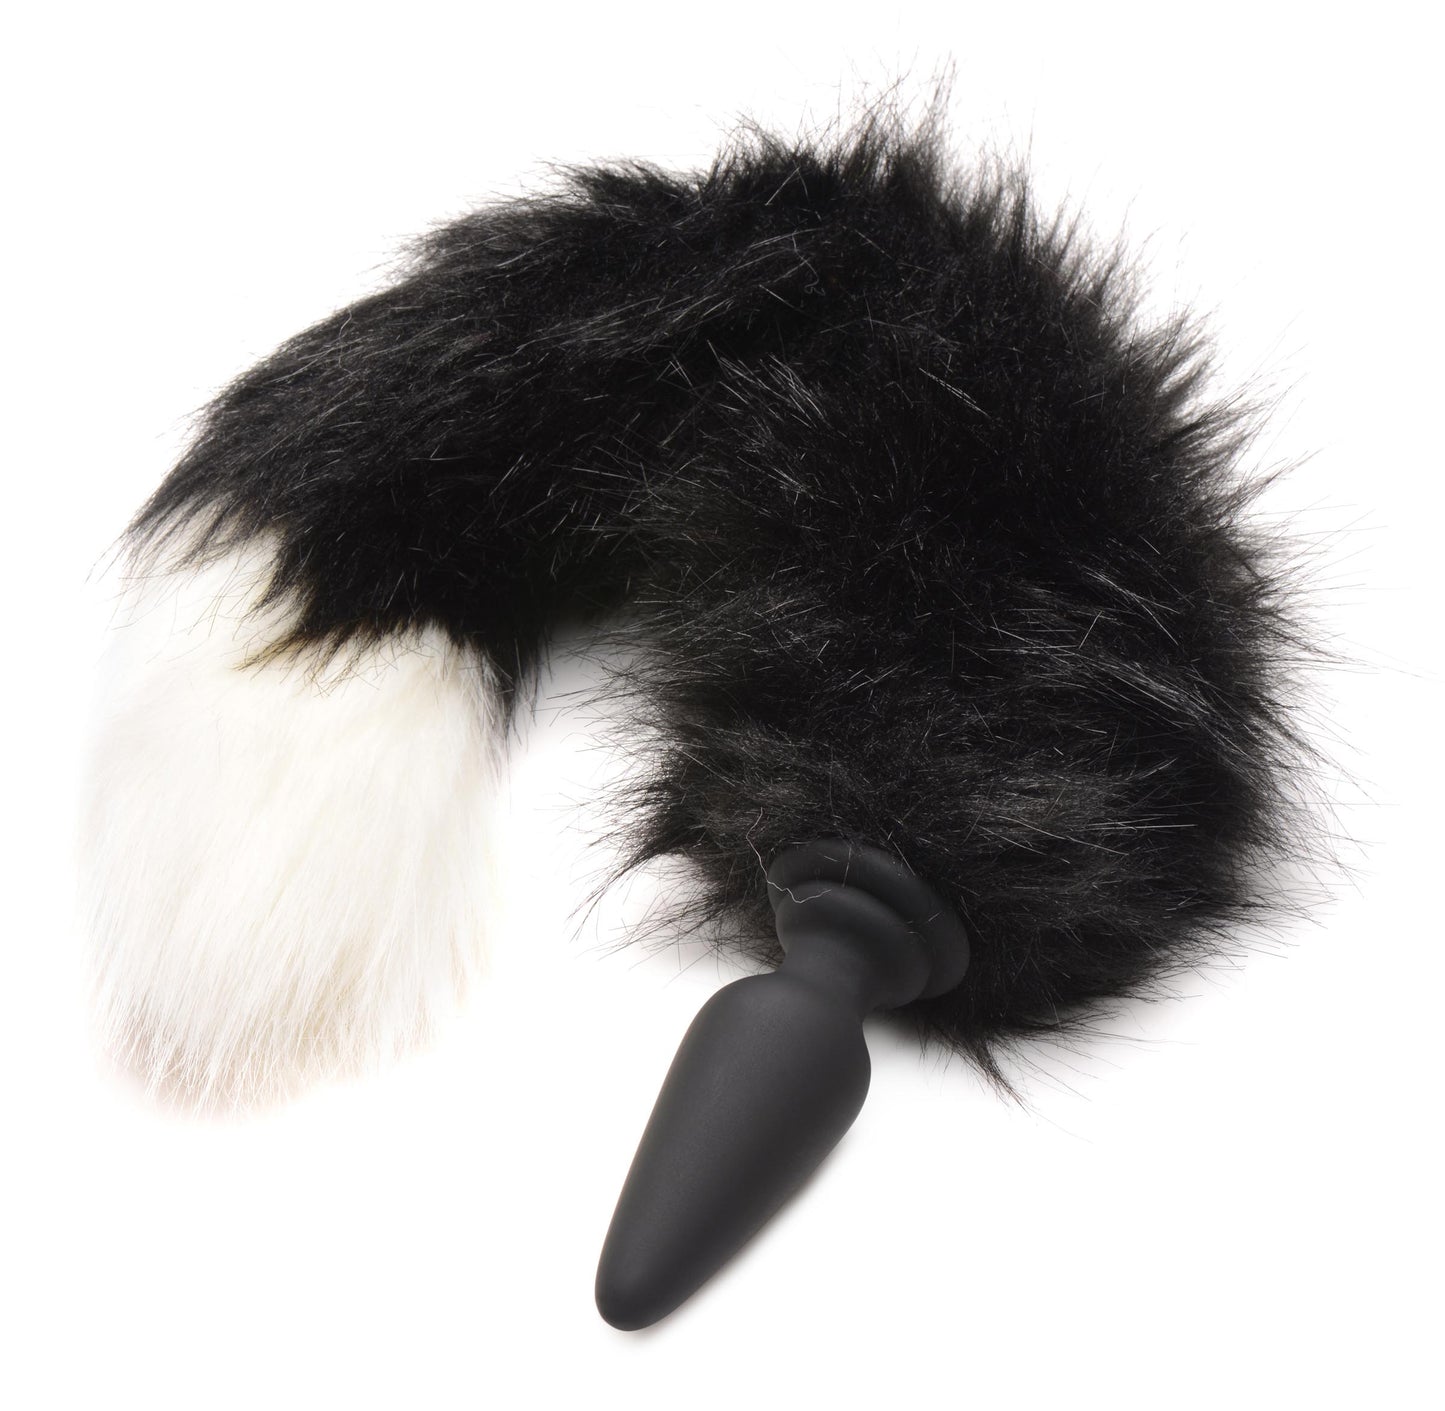 Small Anal Plug With Interchangeable Fox Tail - Black And White